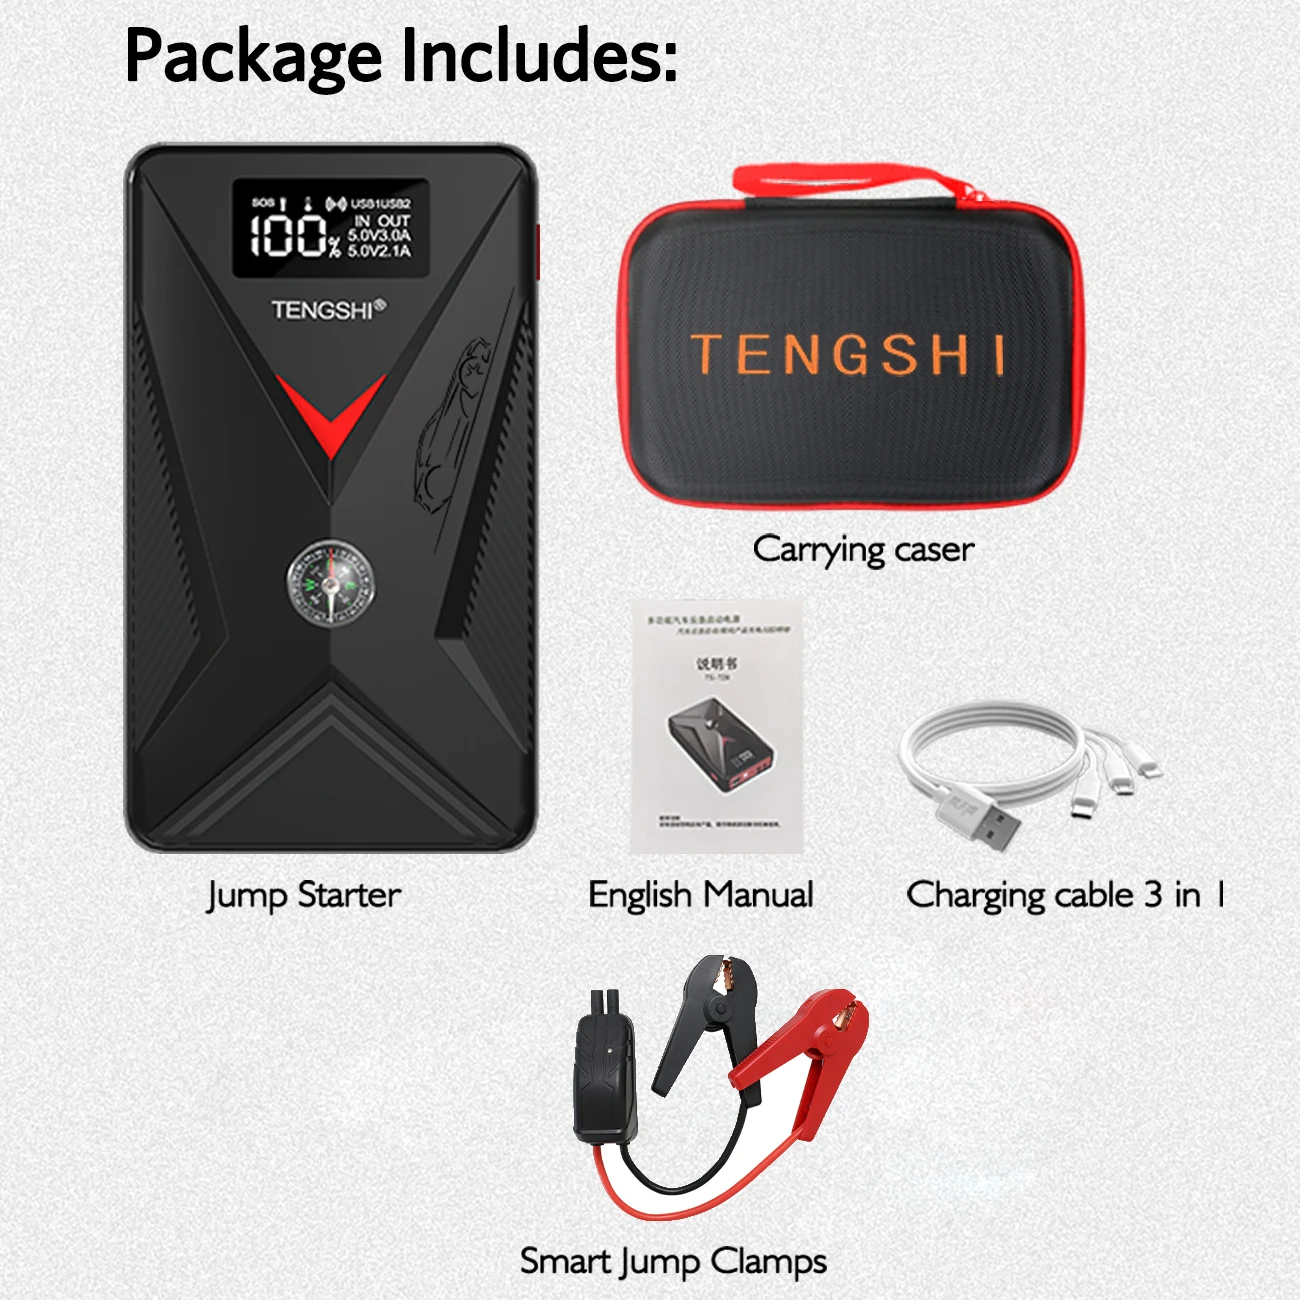 

TENGSHI 12V Car Jump Starter Battery Charger 10000mA 2USB Power Bank 500A Starting Device Start-up for Motorcycle St